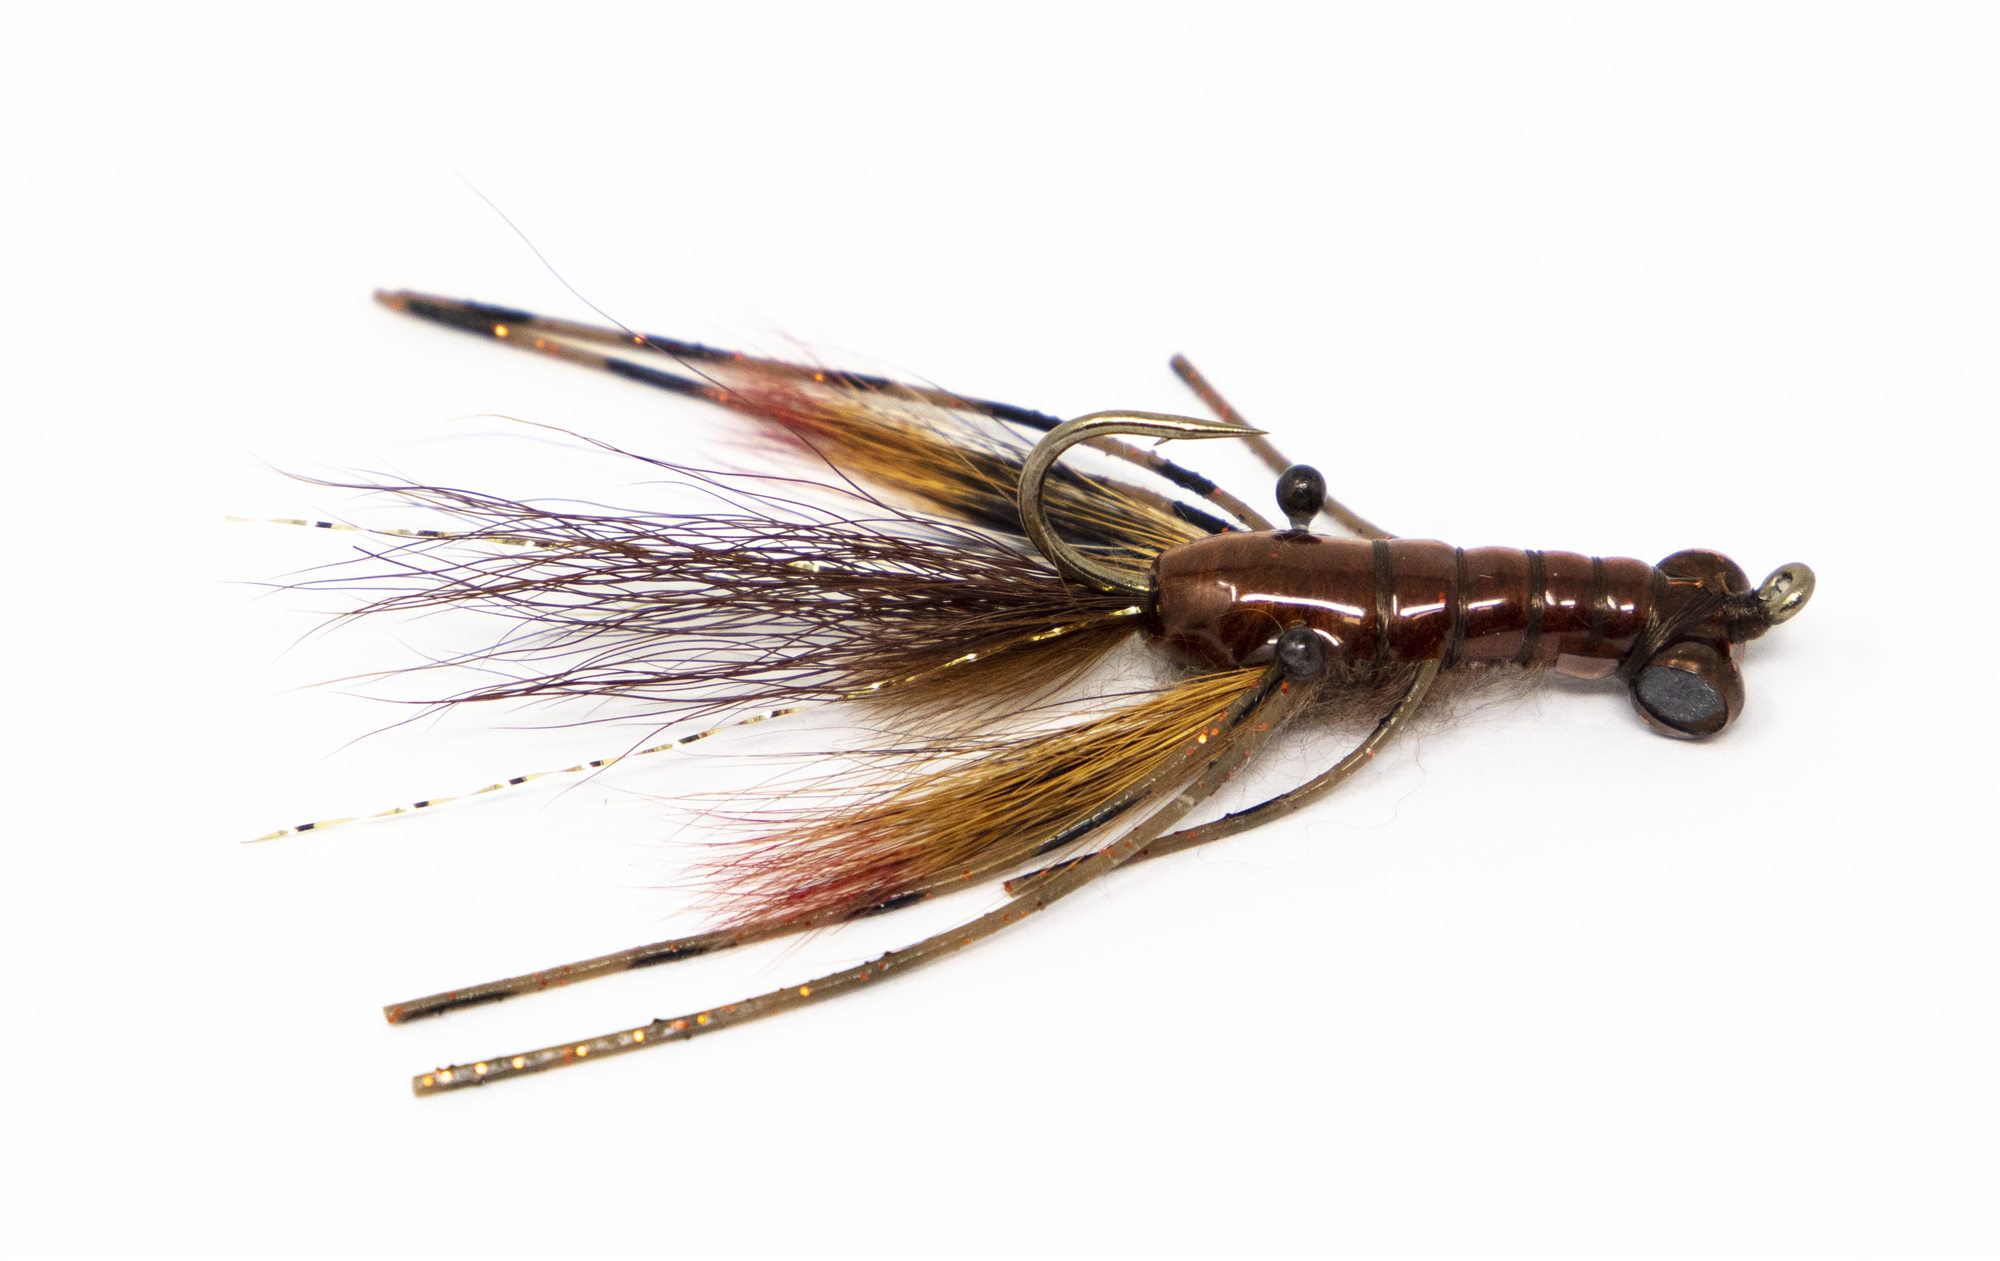 Wilson's Roadkill Craw is a wonderful crayfish fly pattern that works especially well on bass.